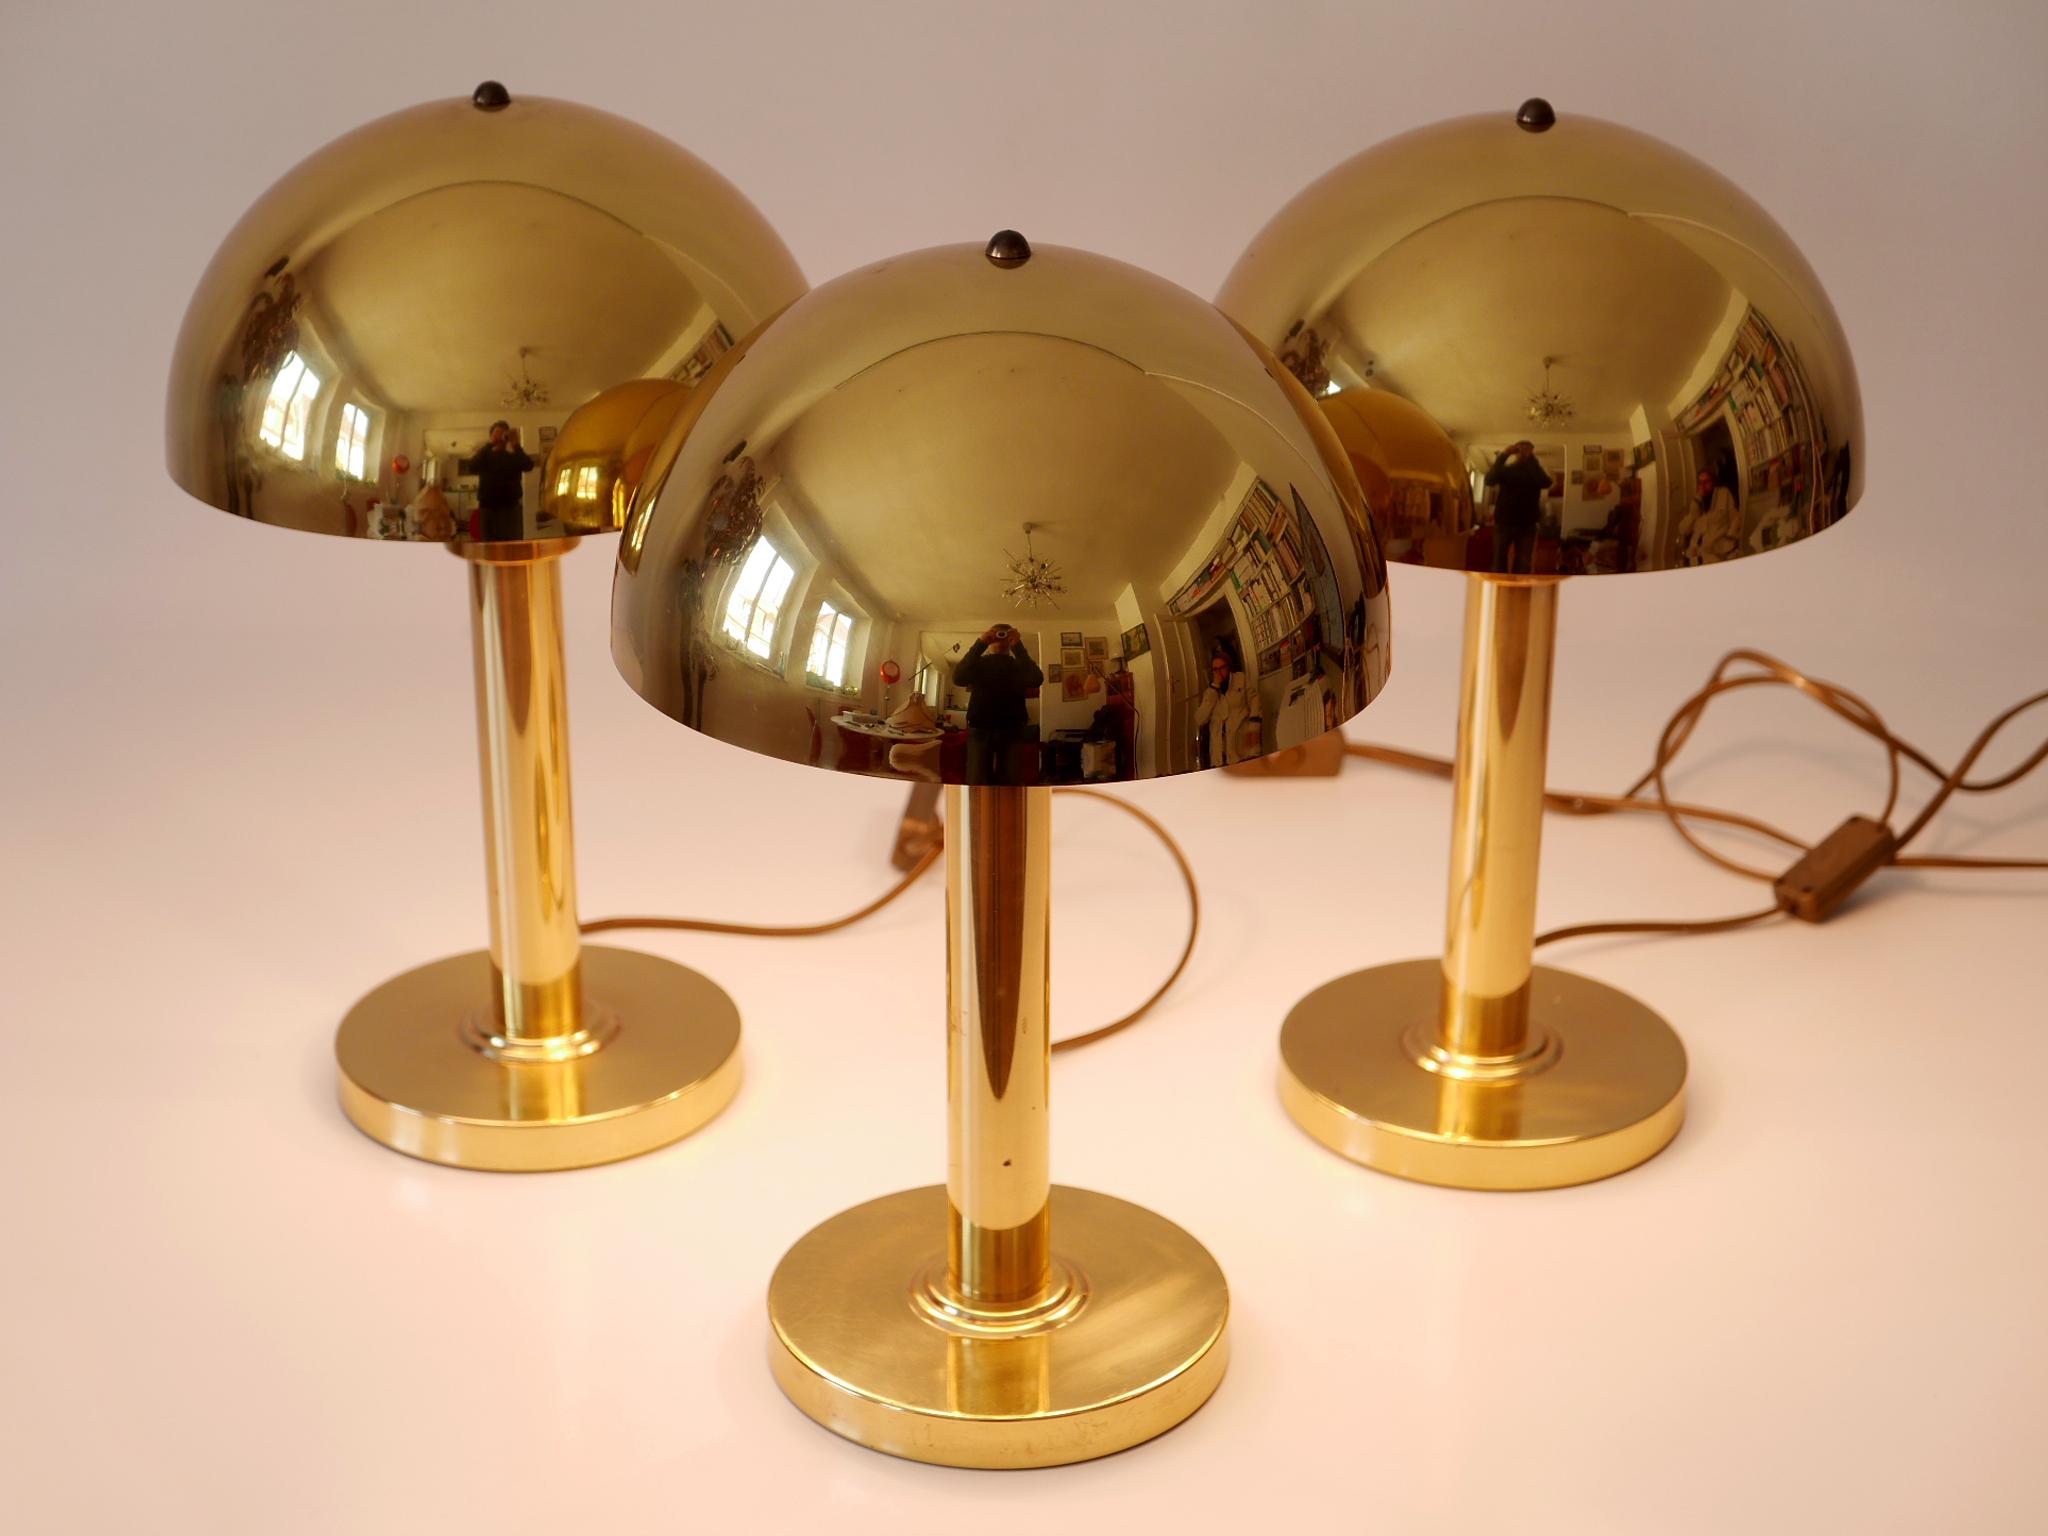 Elegant Mid-Century Modern Brass Table Lamps by WSB, Germany, 1960s For Sale 4